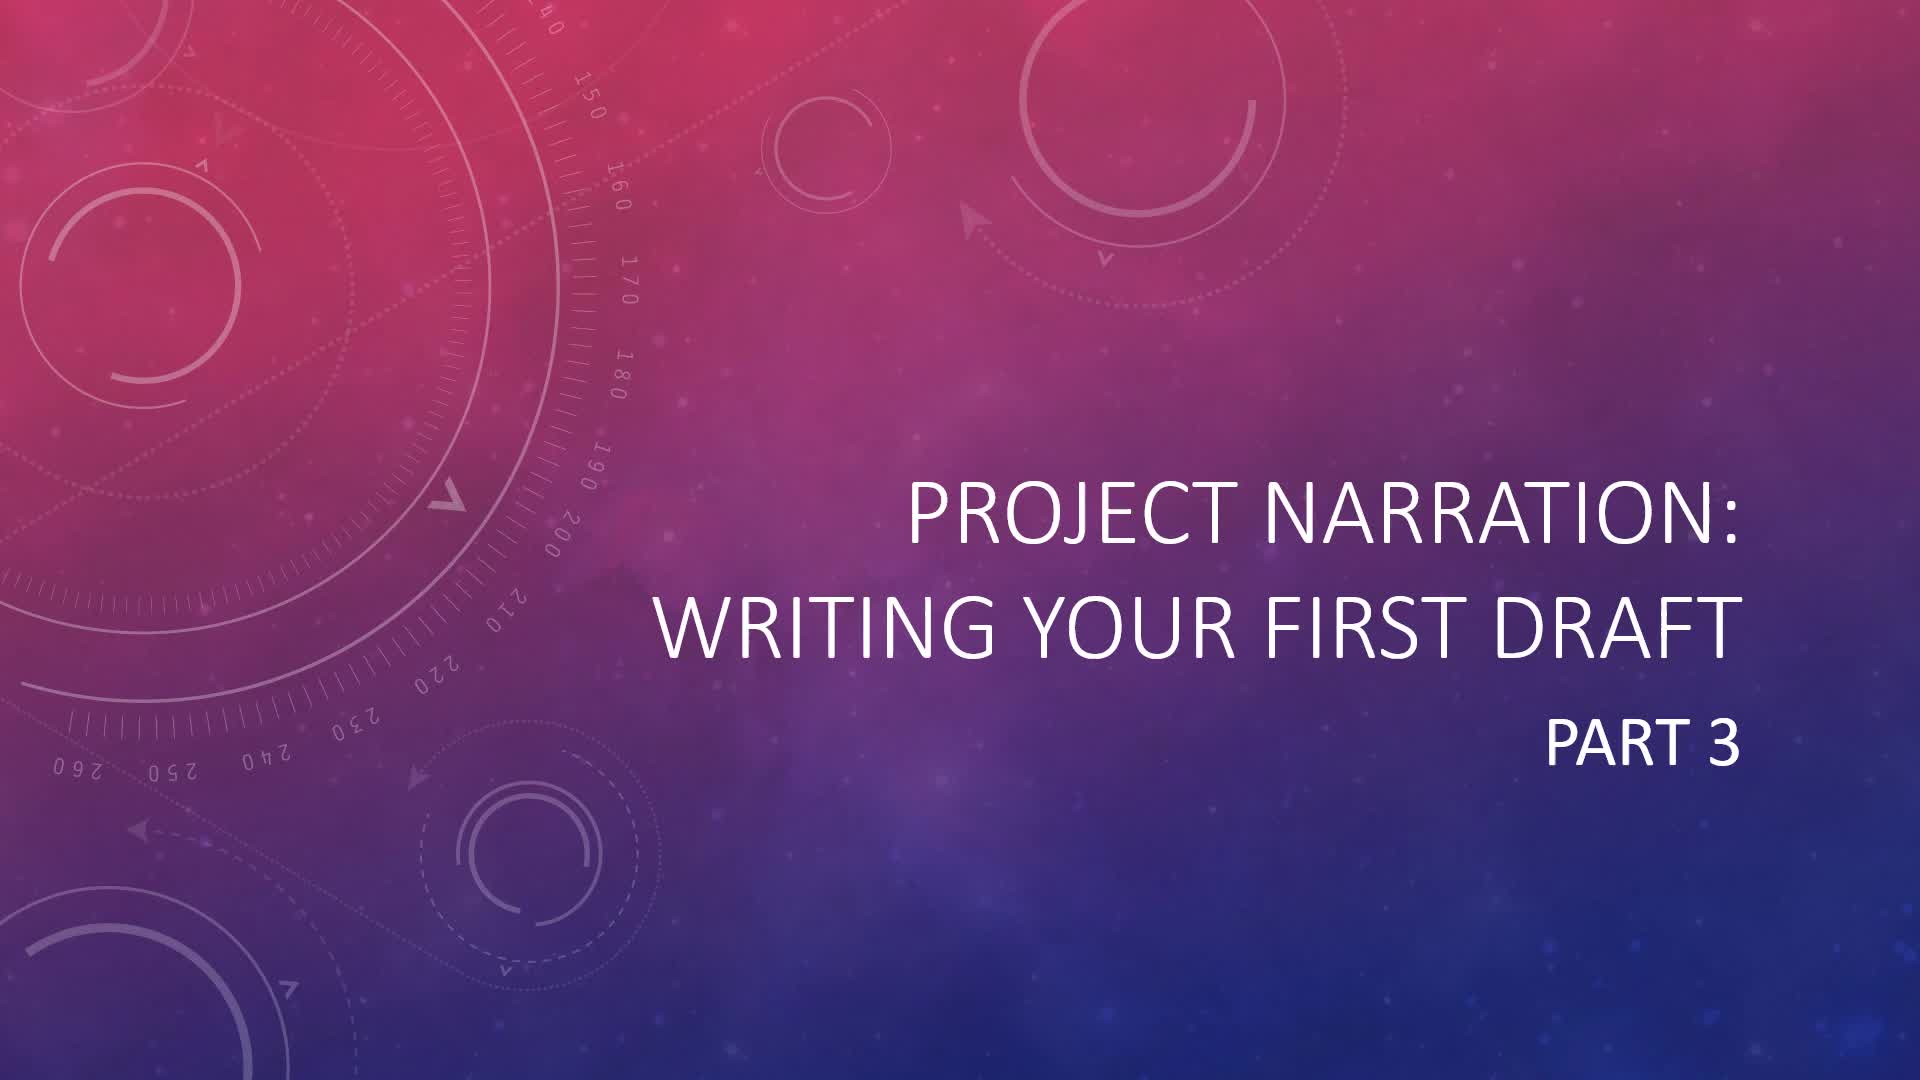 Project Narration: Writing Your First Draft Part 3